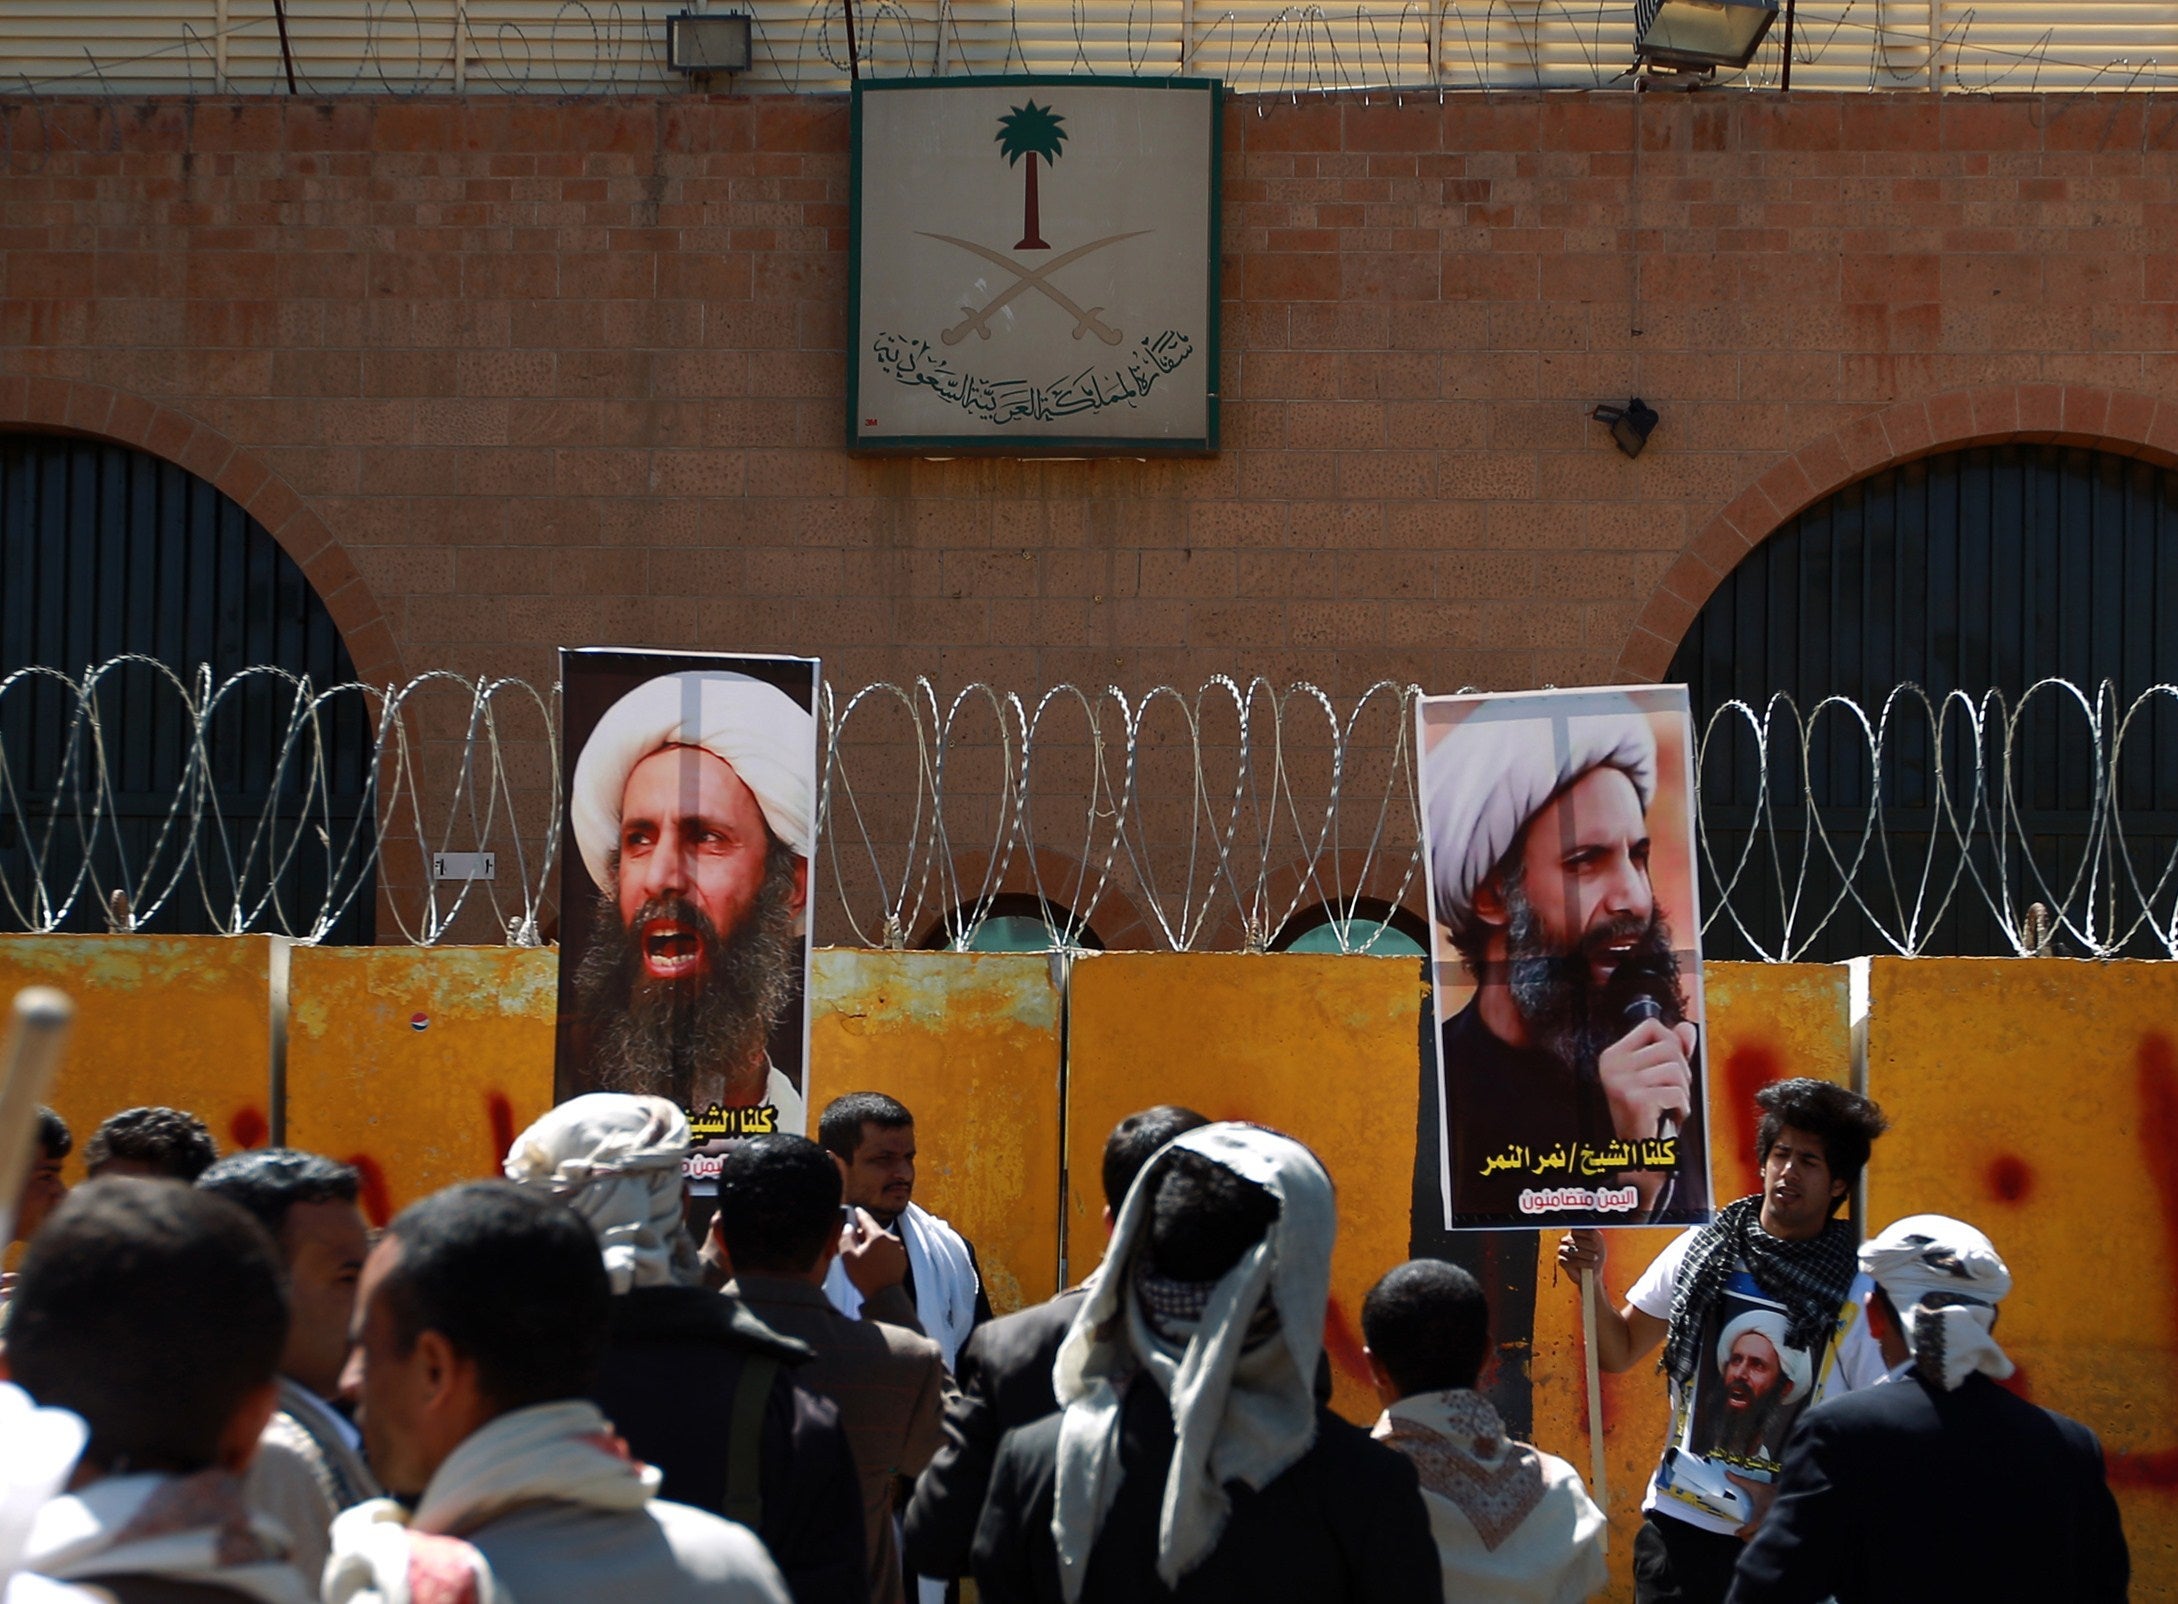 Yemeni protesters demonstrate outside the Saudi embassy in Sanaa against the death sentence of cleric leader Sheikh Nimr al-Nimr